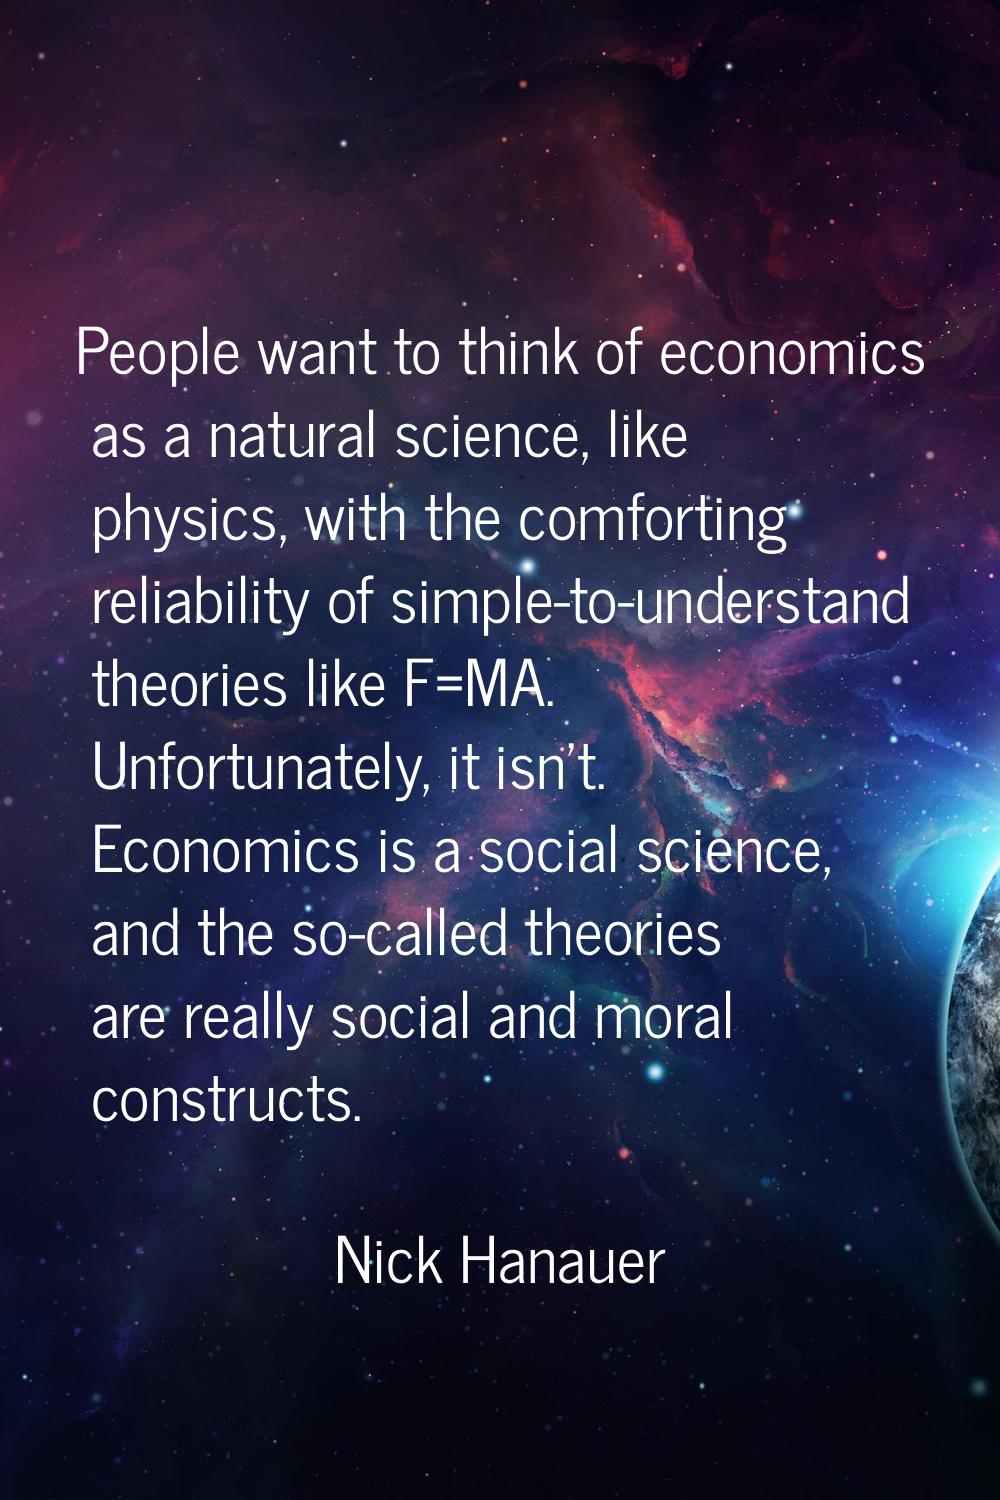 People want to think of economics as a natural science, like physics, with the comforting reliabili